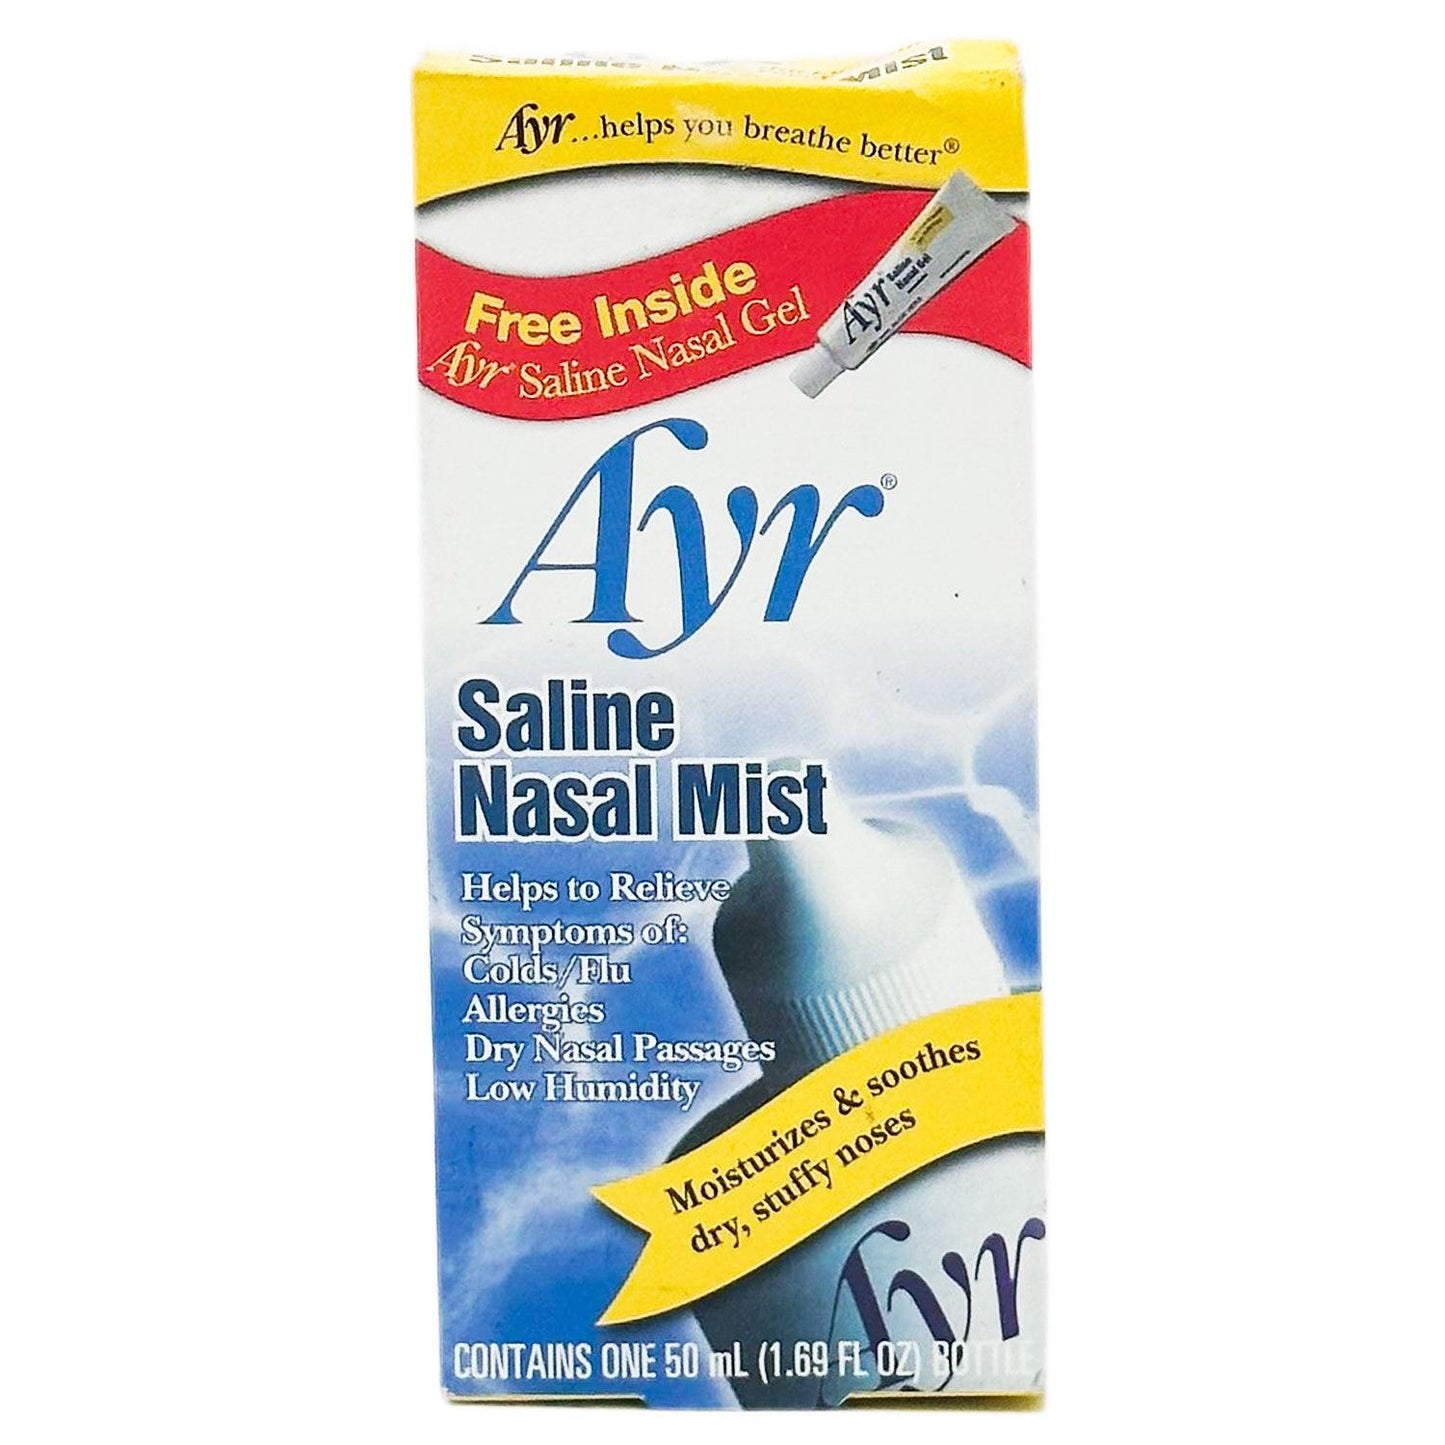 Ayr Saline Nasal Mist Soothes Dry Nose Symptoms | Contains One 50 mL Bottle - Home Revival Shop